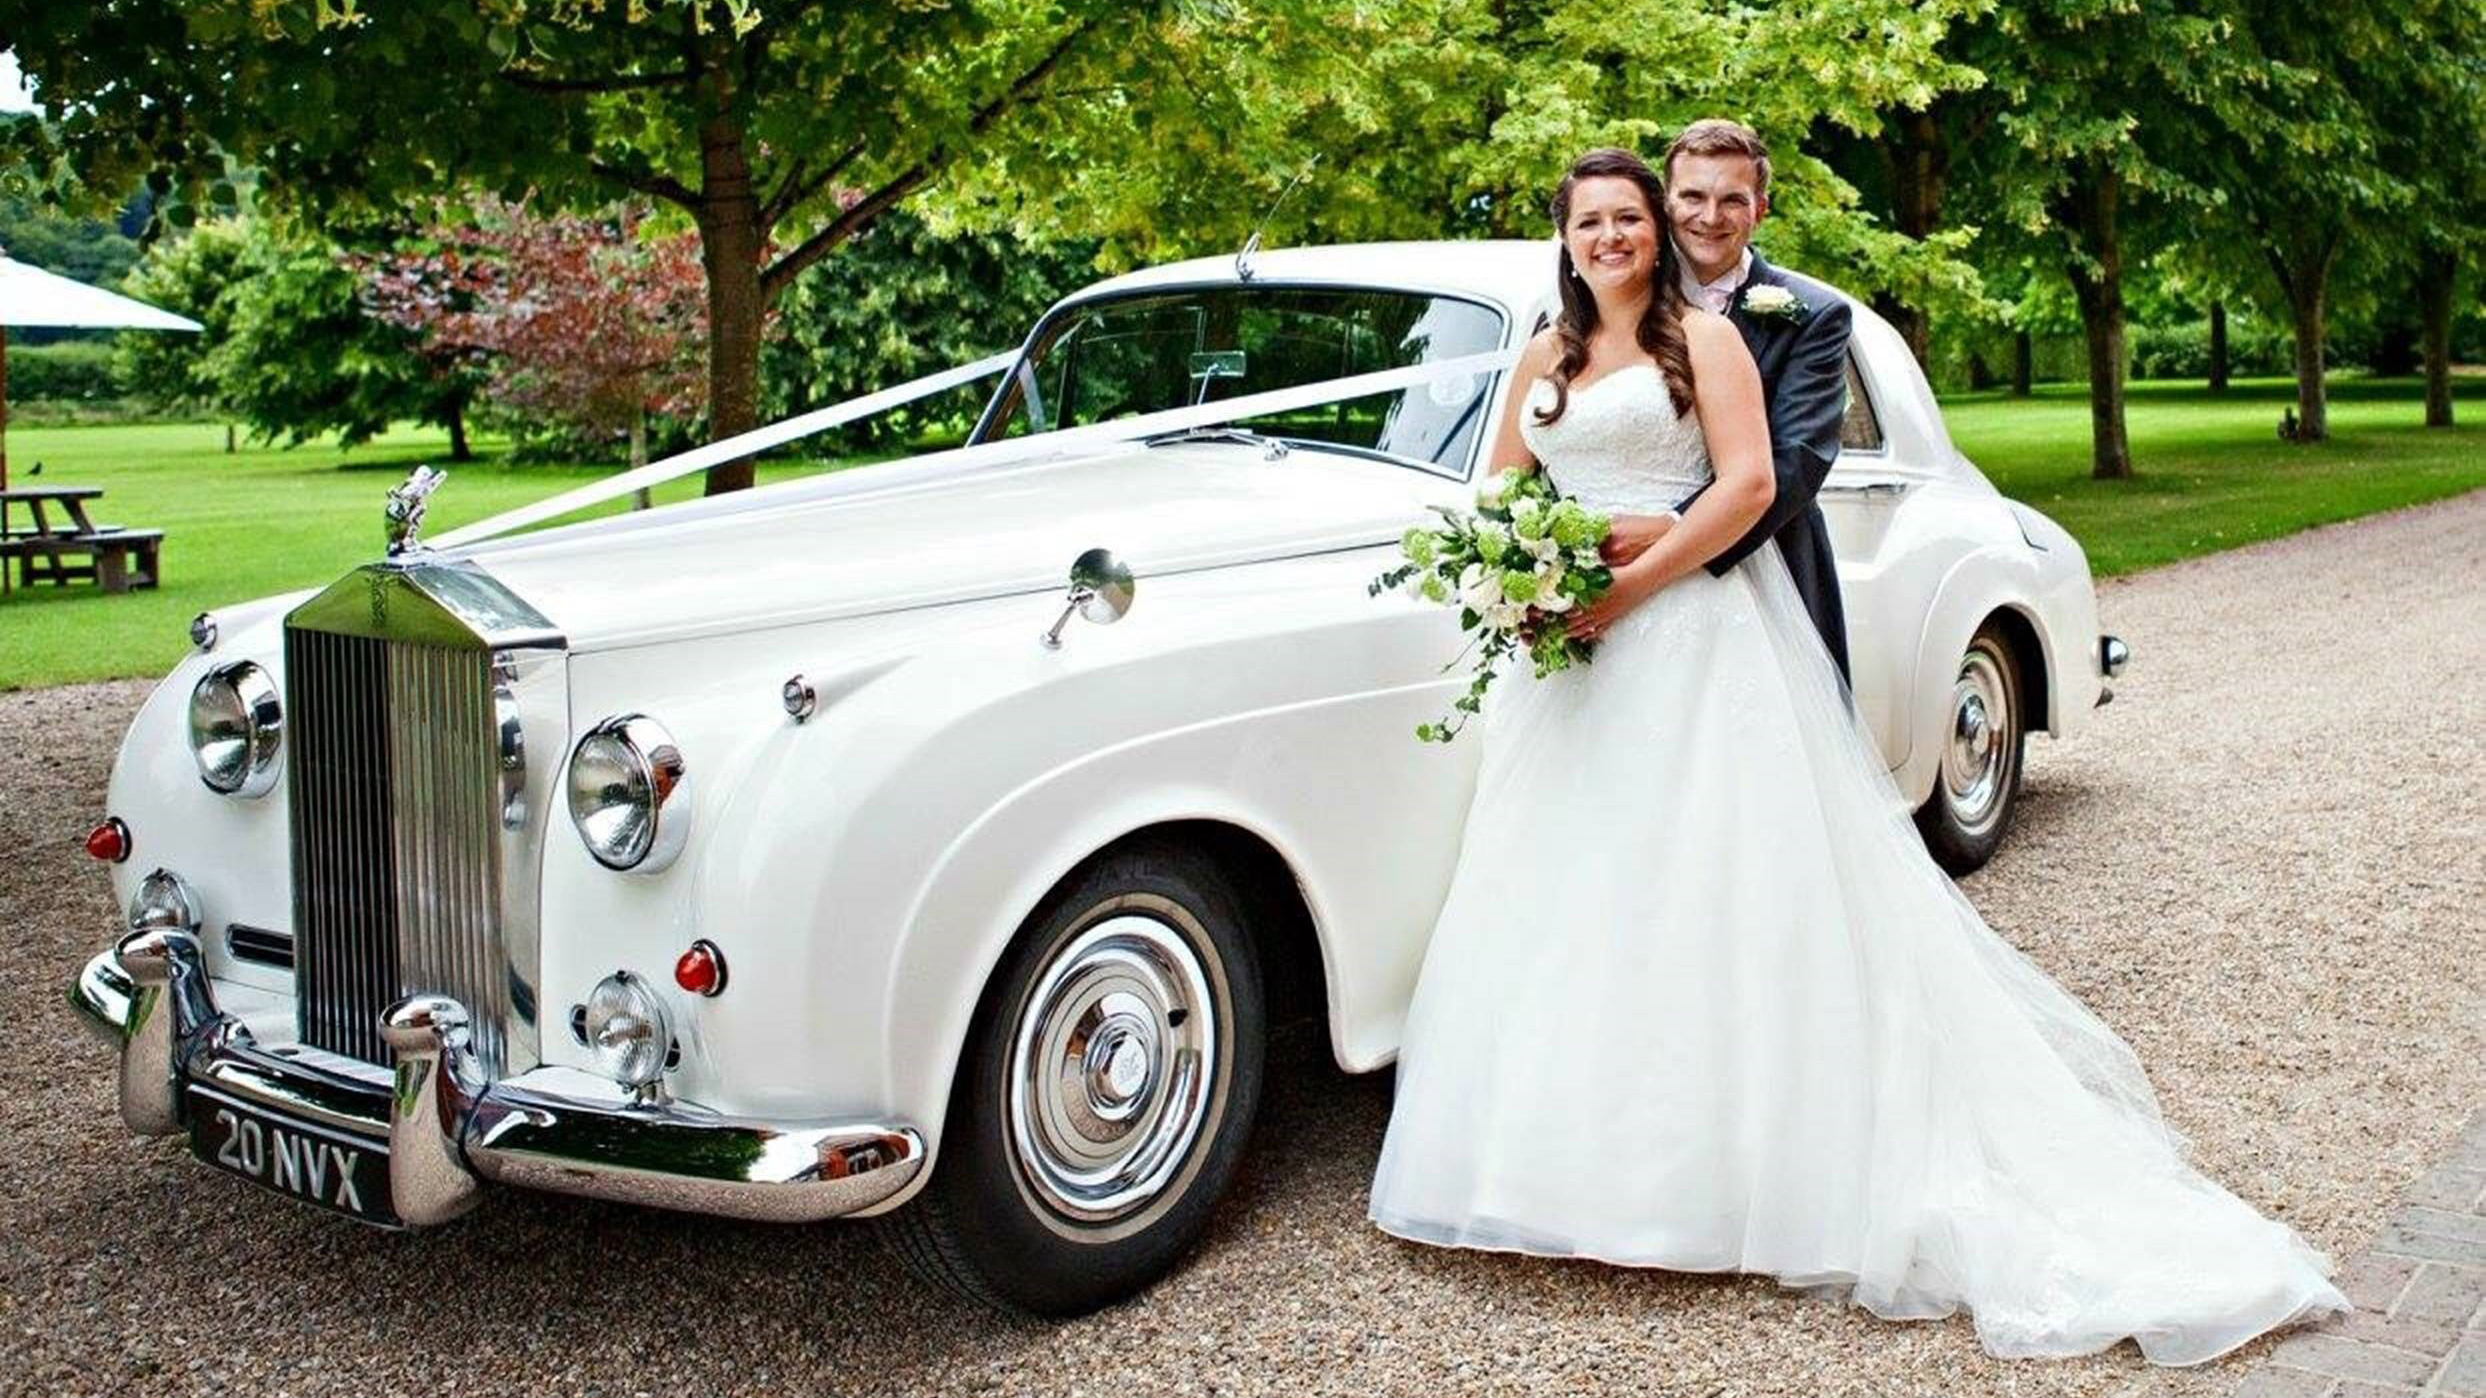 White Rolls-Royce Silver cloud decorated with ivory ribbons parked in the entrance of a wedding venue in Cranfield. Bride and Groom are standing by the vehicle. Groom is holding his Bride in his arms while she holds her bridal bouquet.